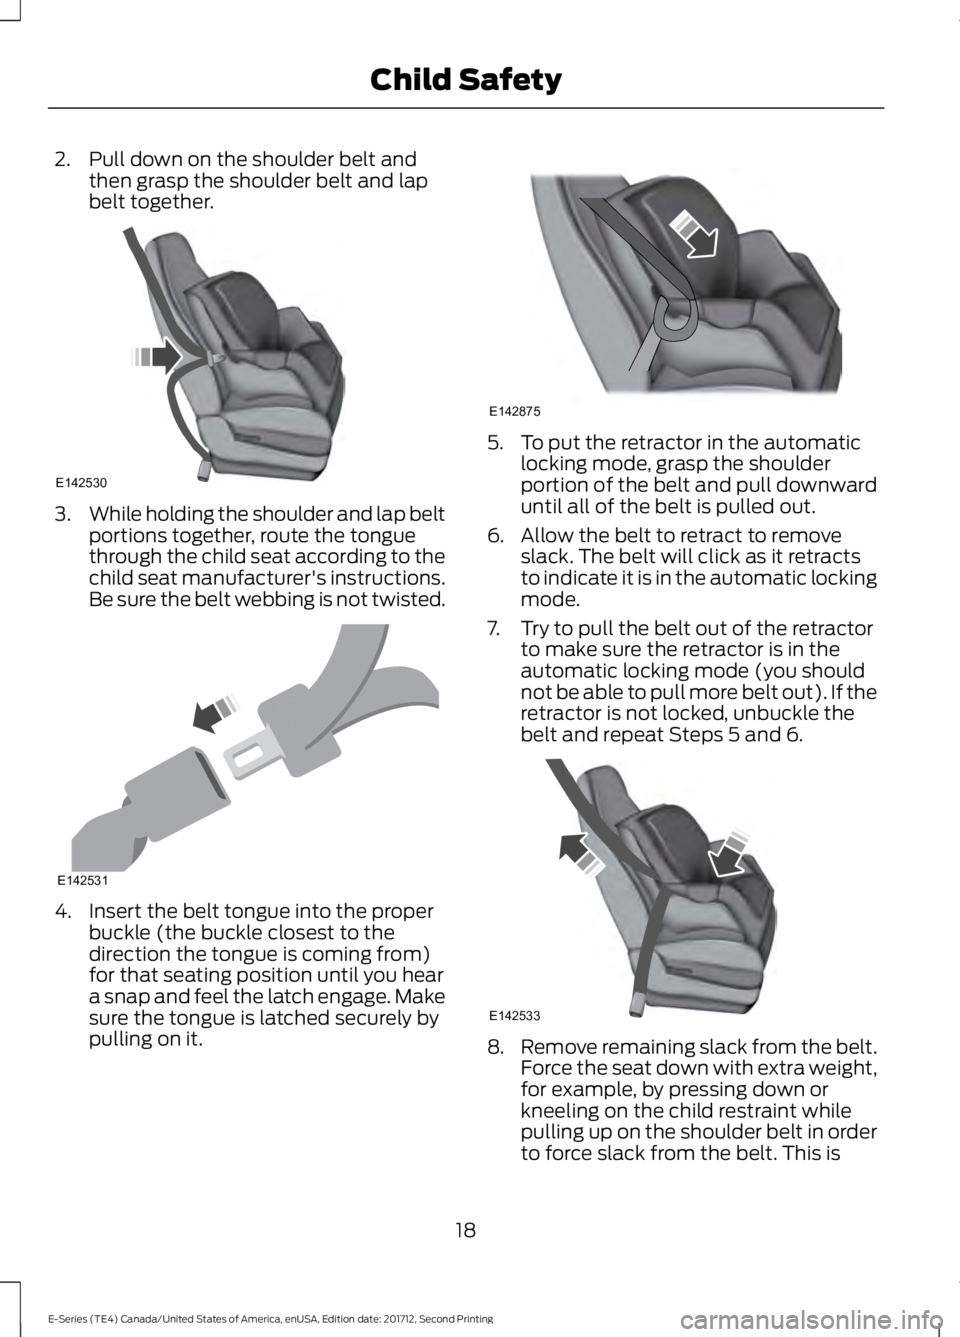 FORD E SERIES 2018  Owners Manual 2. Pull down on the shoulder belt andthen grasp the shoulder belt and lapbelt together.
3.While holding the shoulder and lap beltportions together, route the tonguethrough the child seat according to 